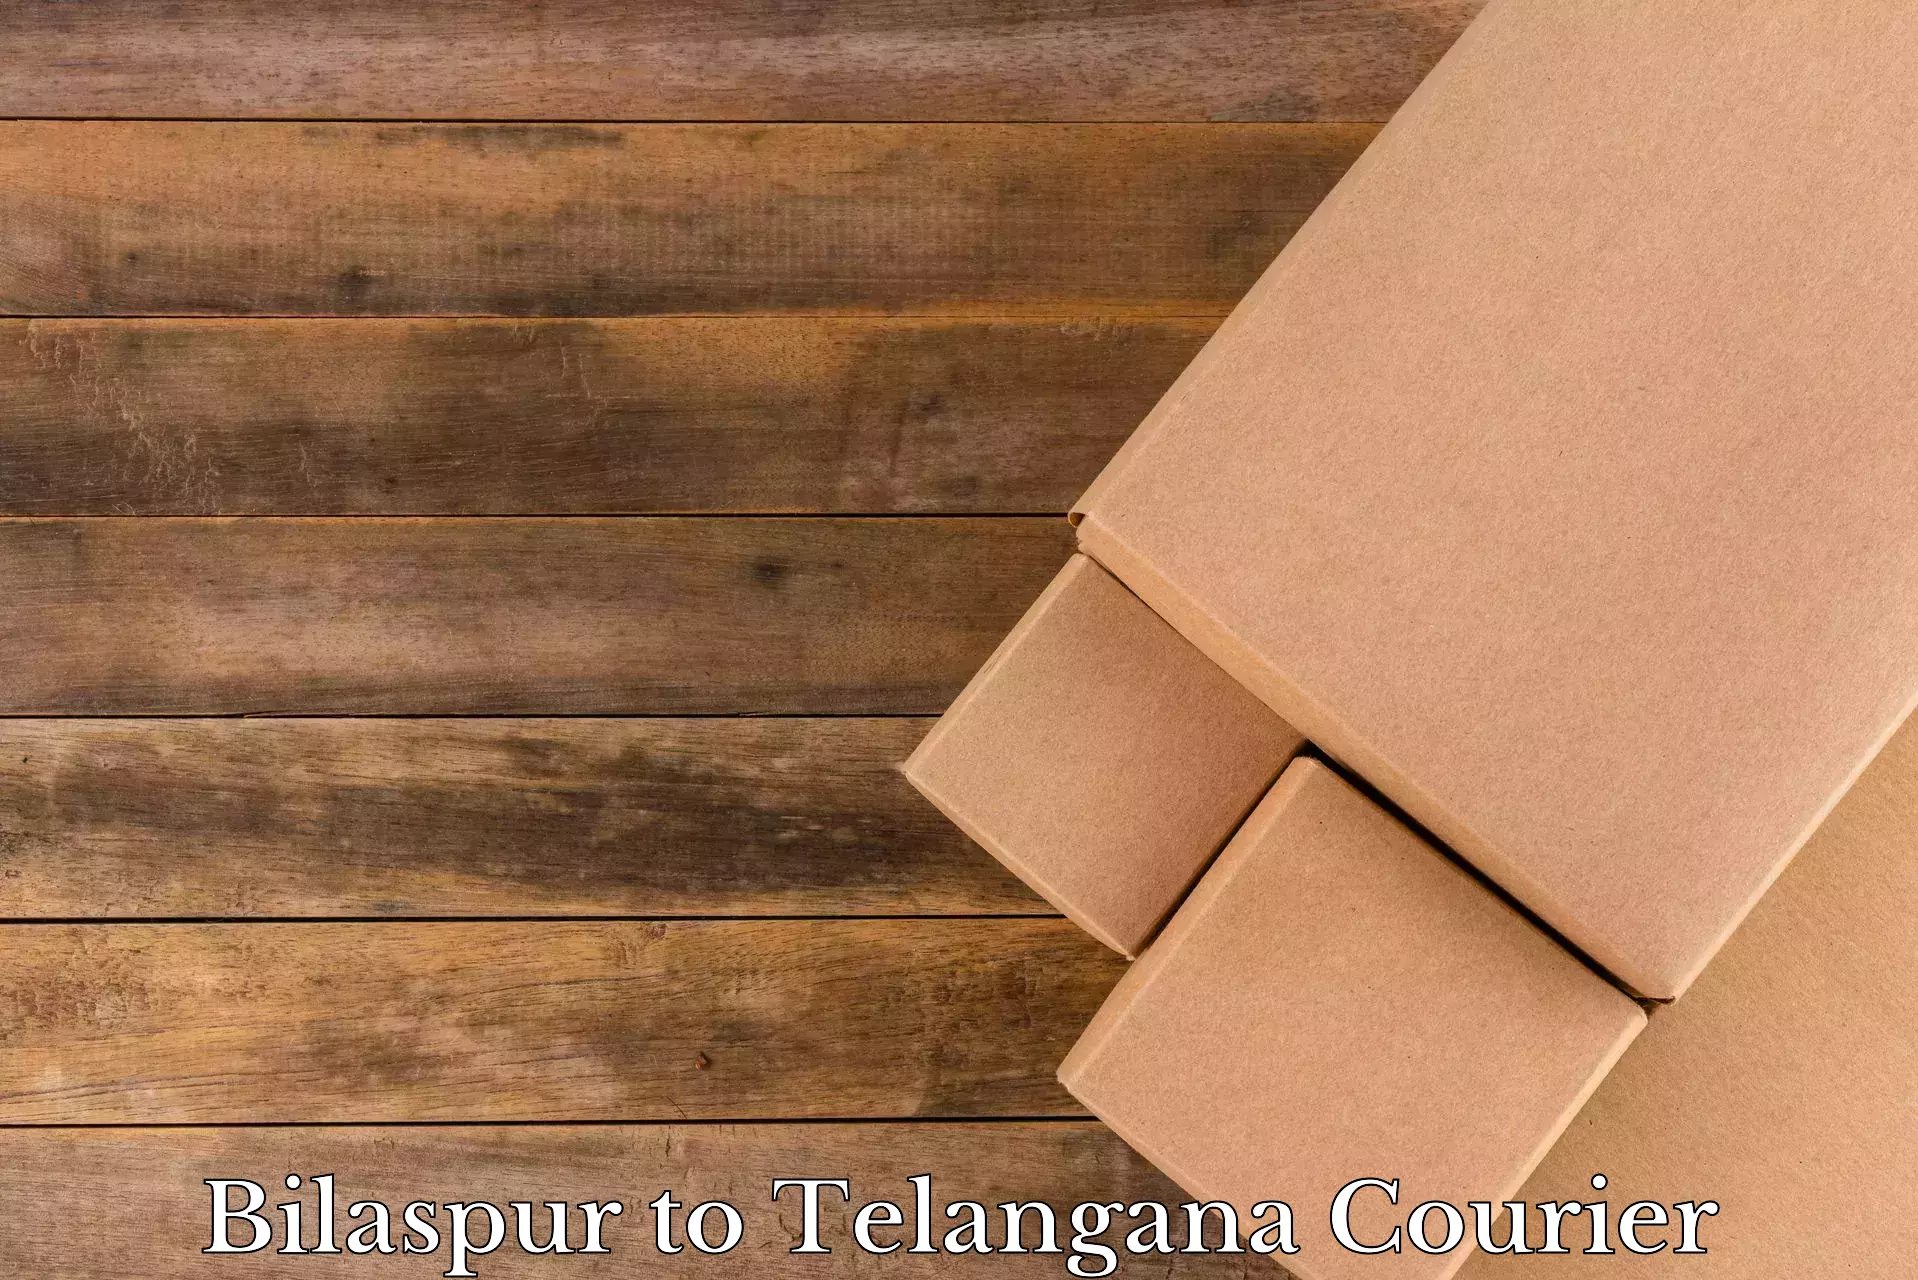 Moving and packing experts Bilaspur to Nizamabad